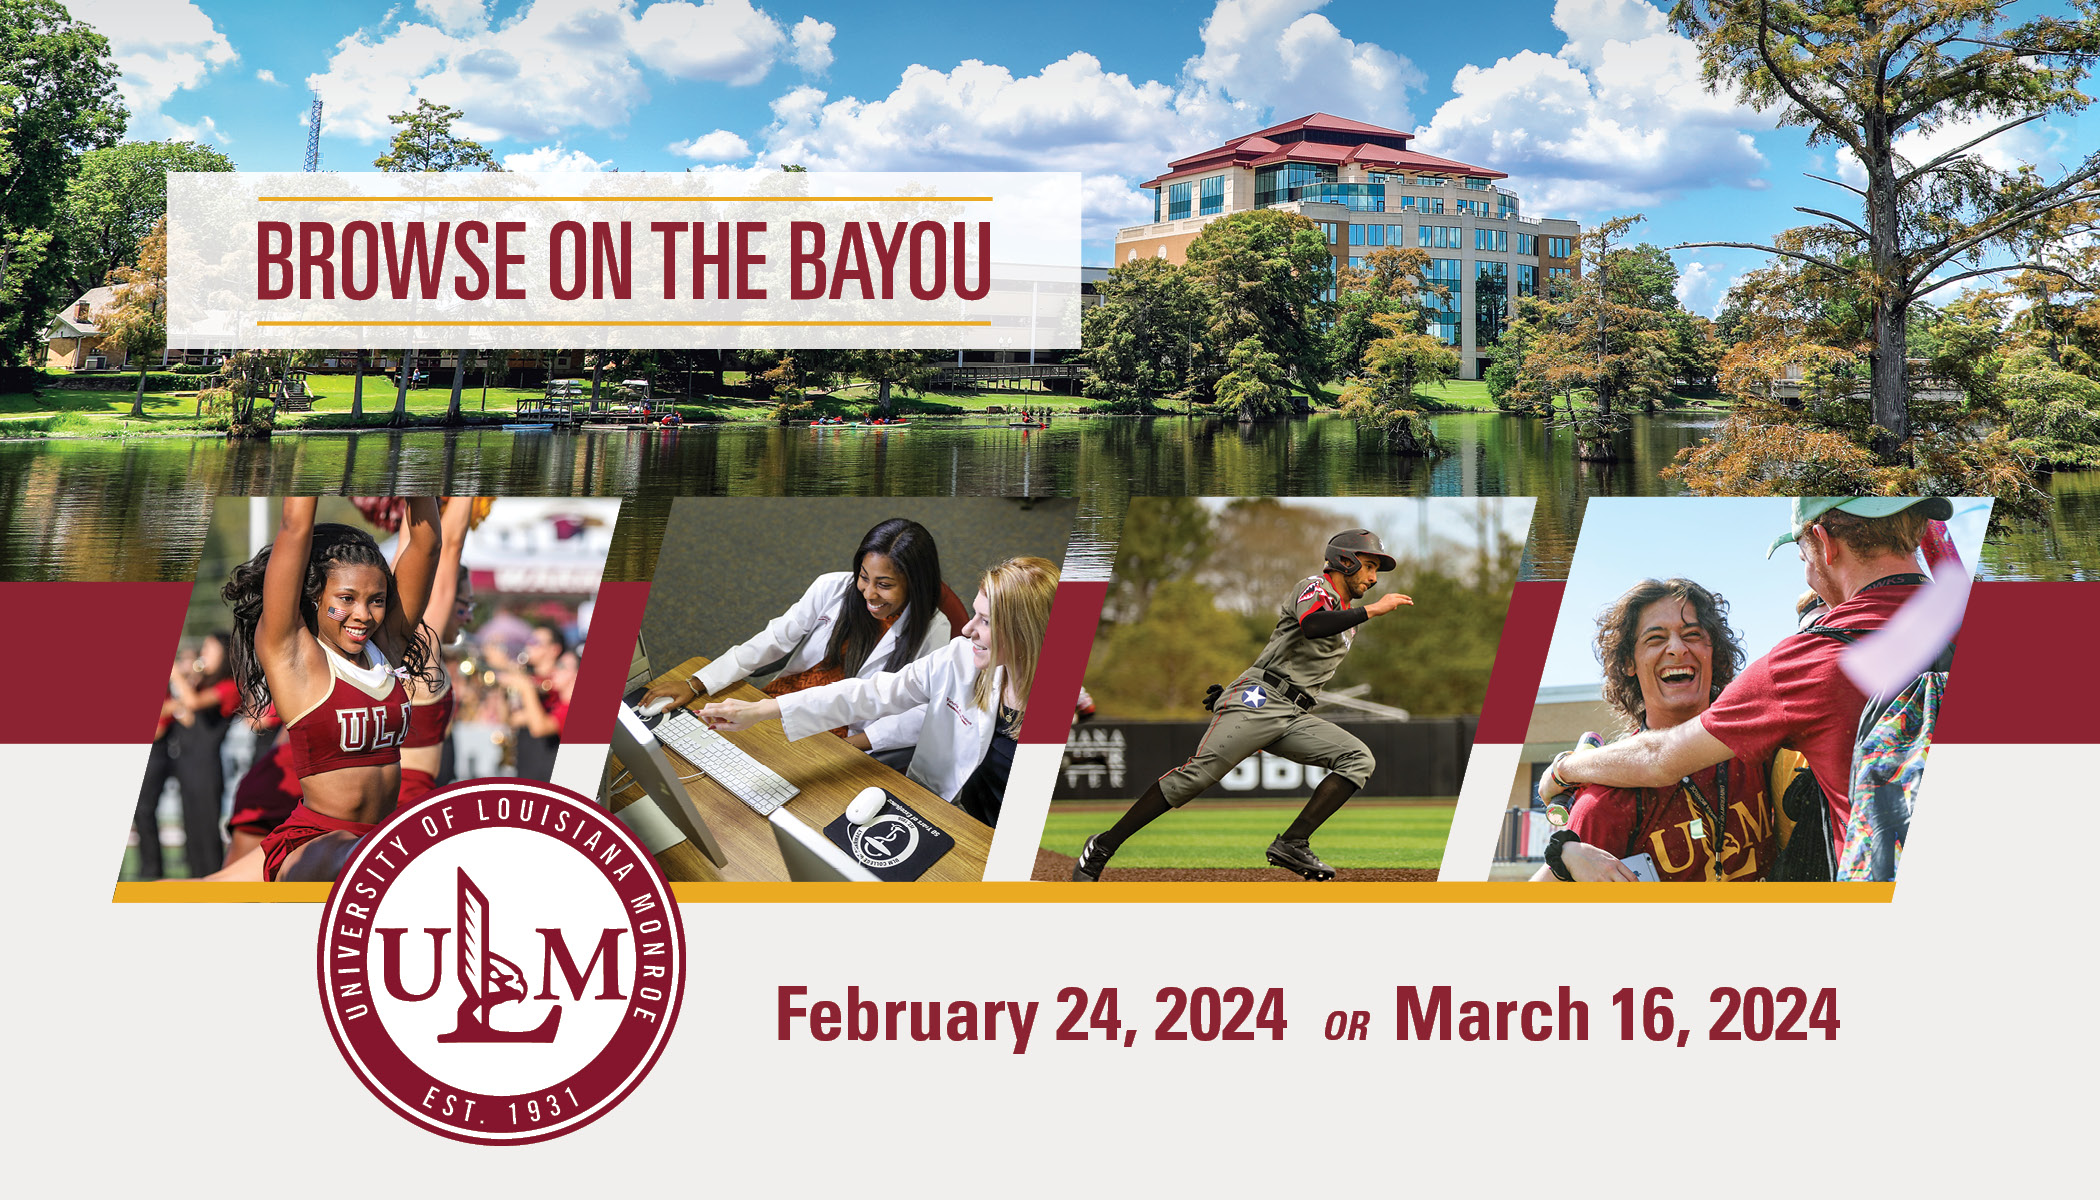 Four photos (a cheerleader, two students pointing at a computer, a baseball player, and two students smiling and embracing) layover an image of a tall building overlooking a bayou. People are kayaking on the bayou. 's logo is in the corner. Text reads, "February 24, 2024 or March 16, 2024"